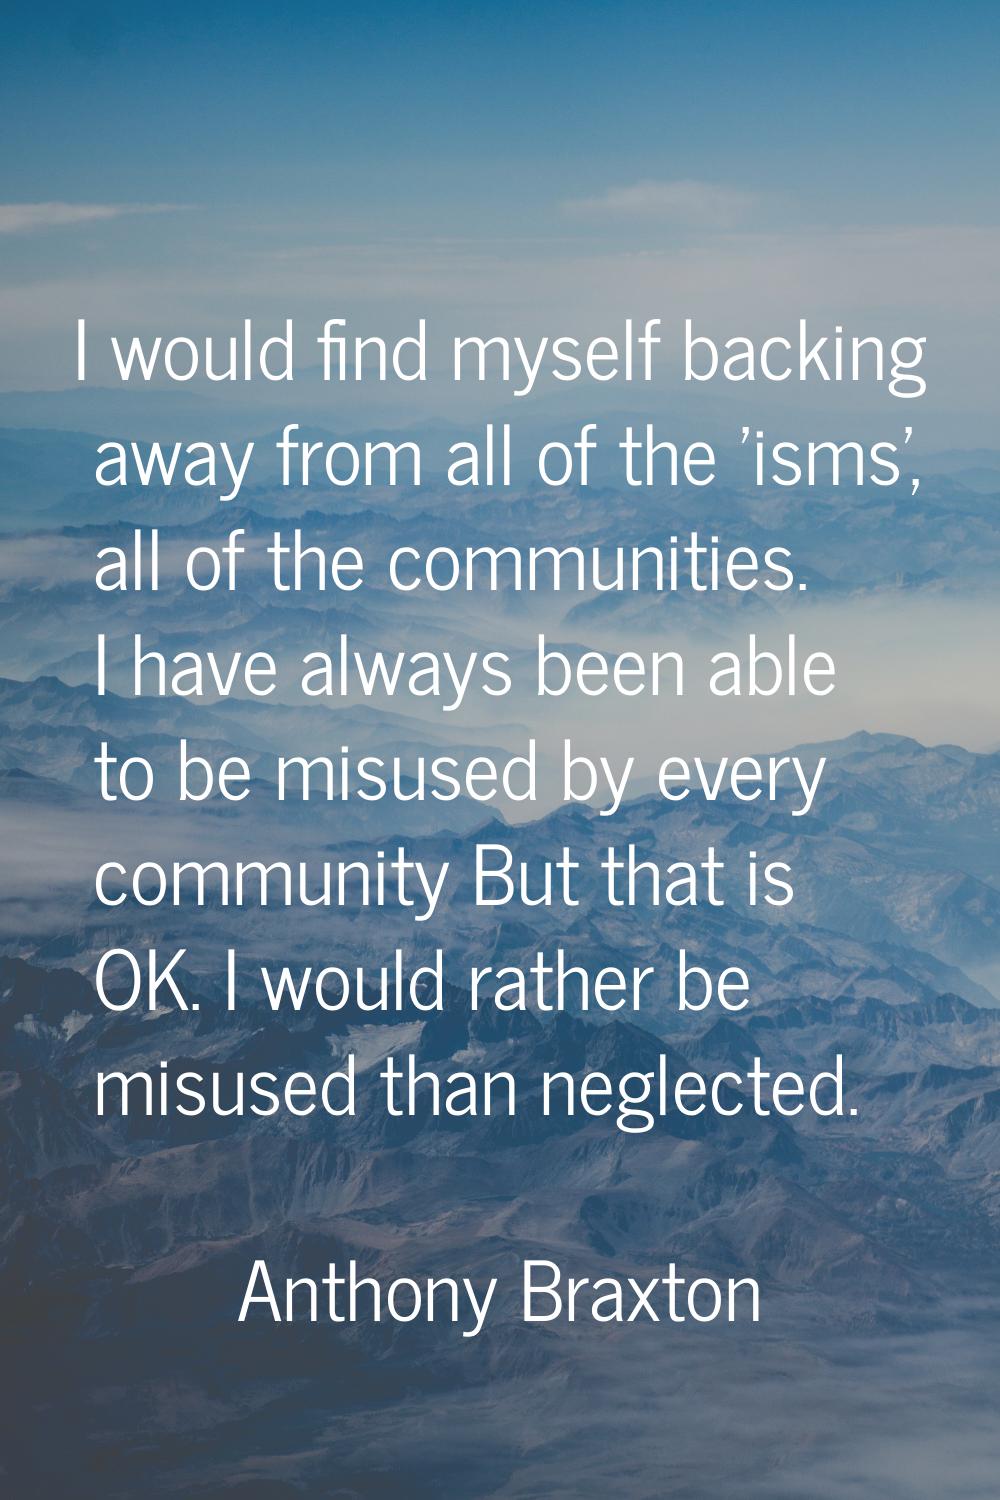 I would find myself backing away from all of the 'isms', all of the communities. I have always been